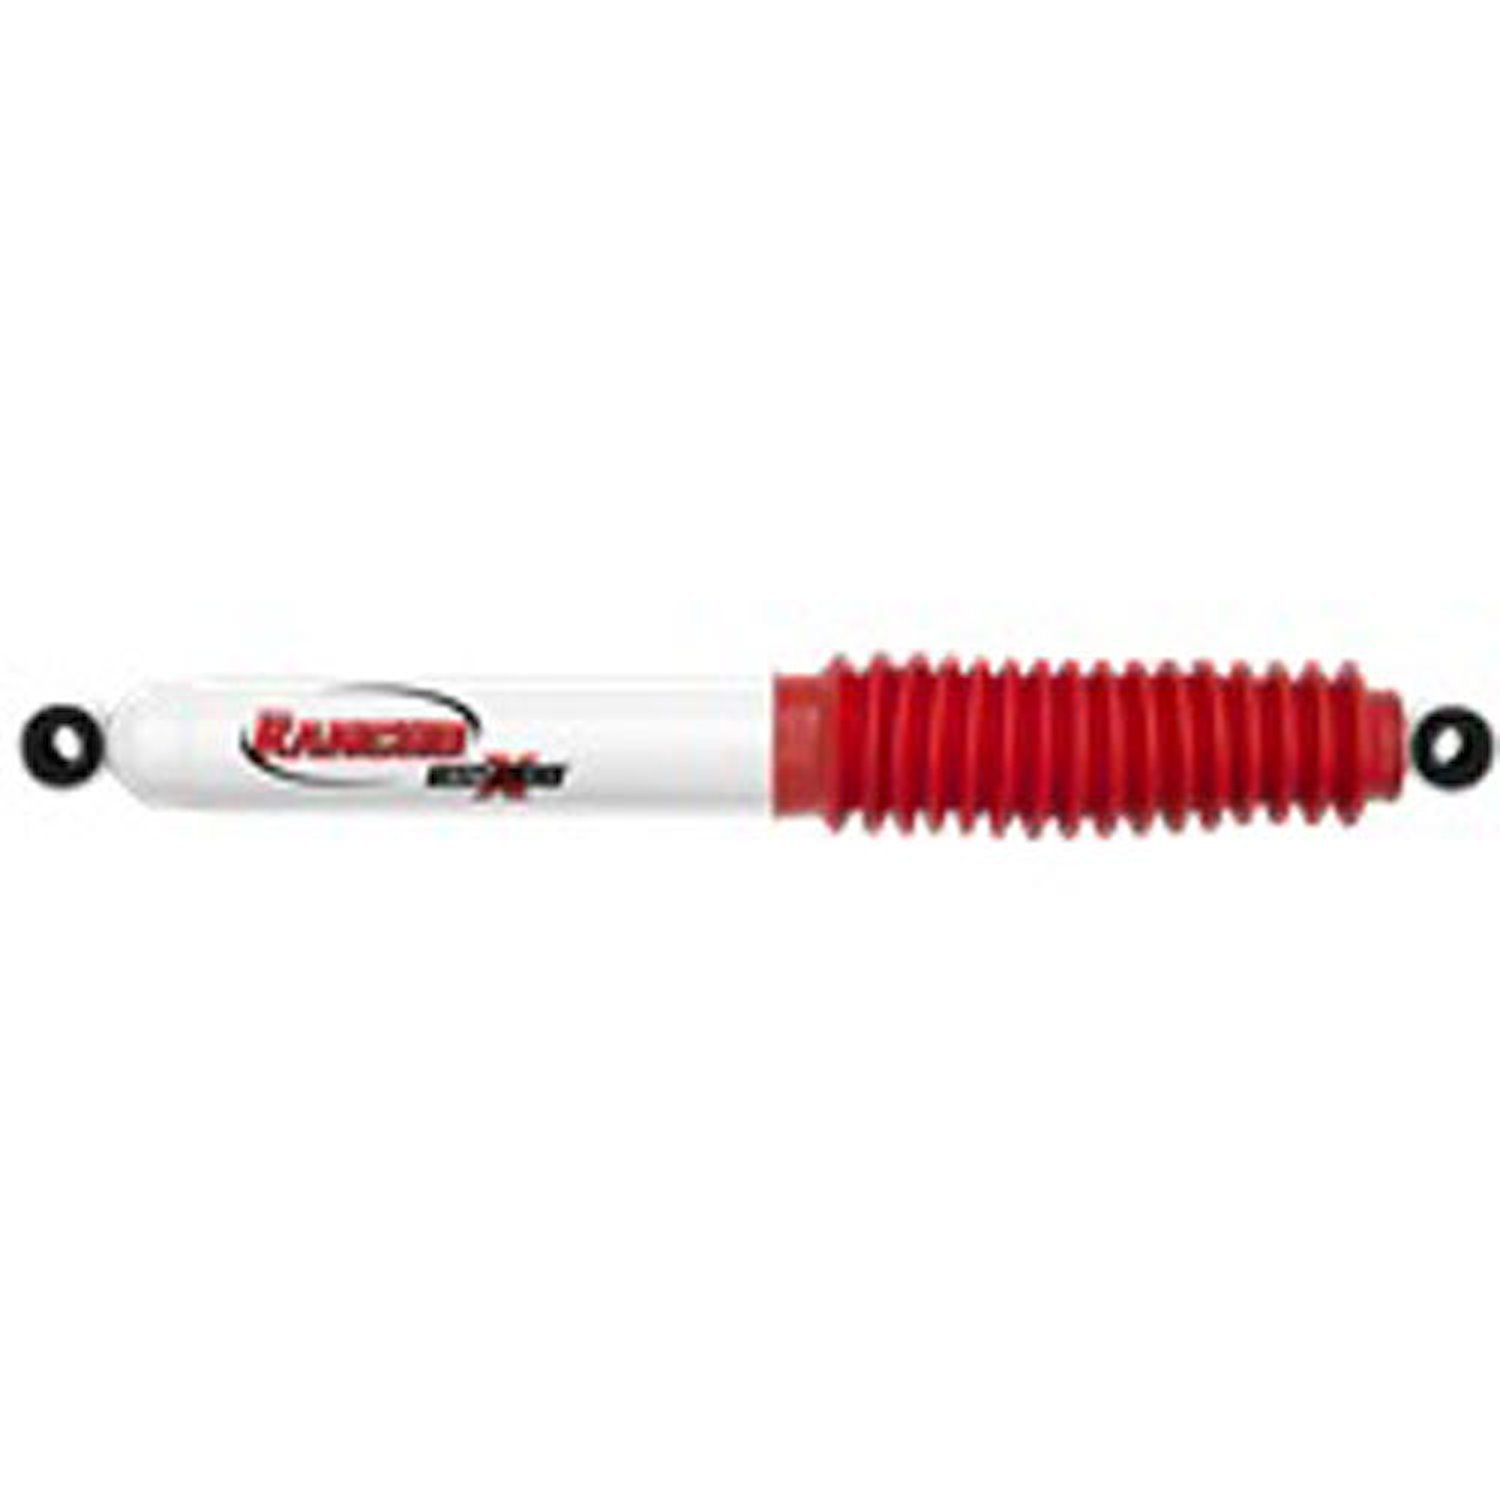 RS5000X Front Shock Absorber Fits GM Full Size Blazer, Jimmy and Vans